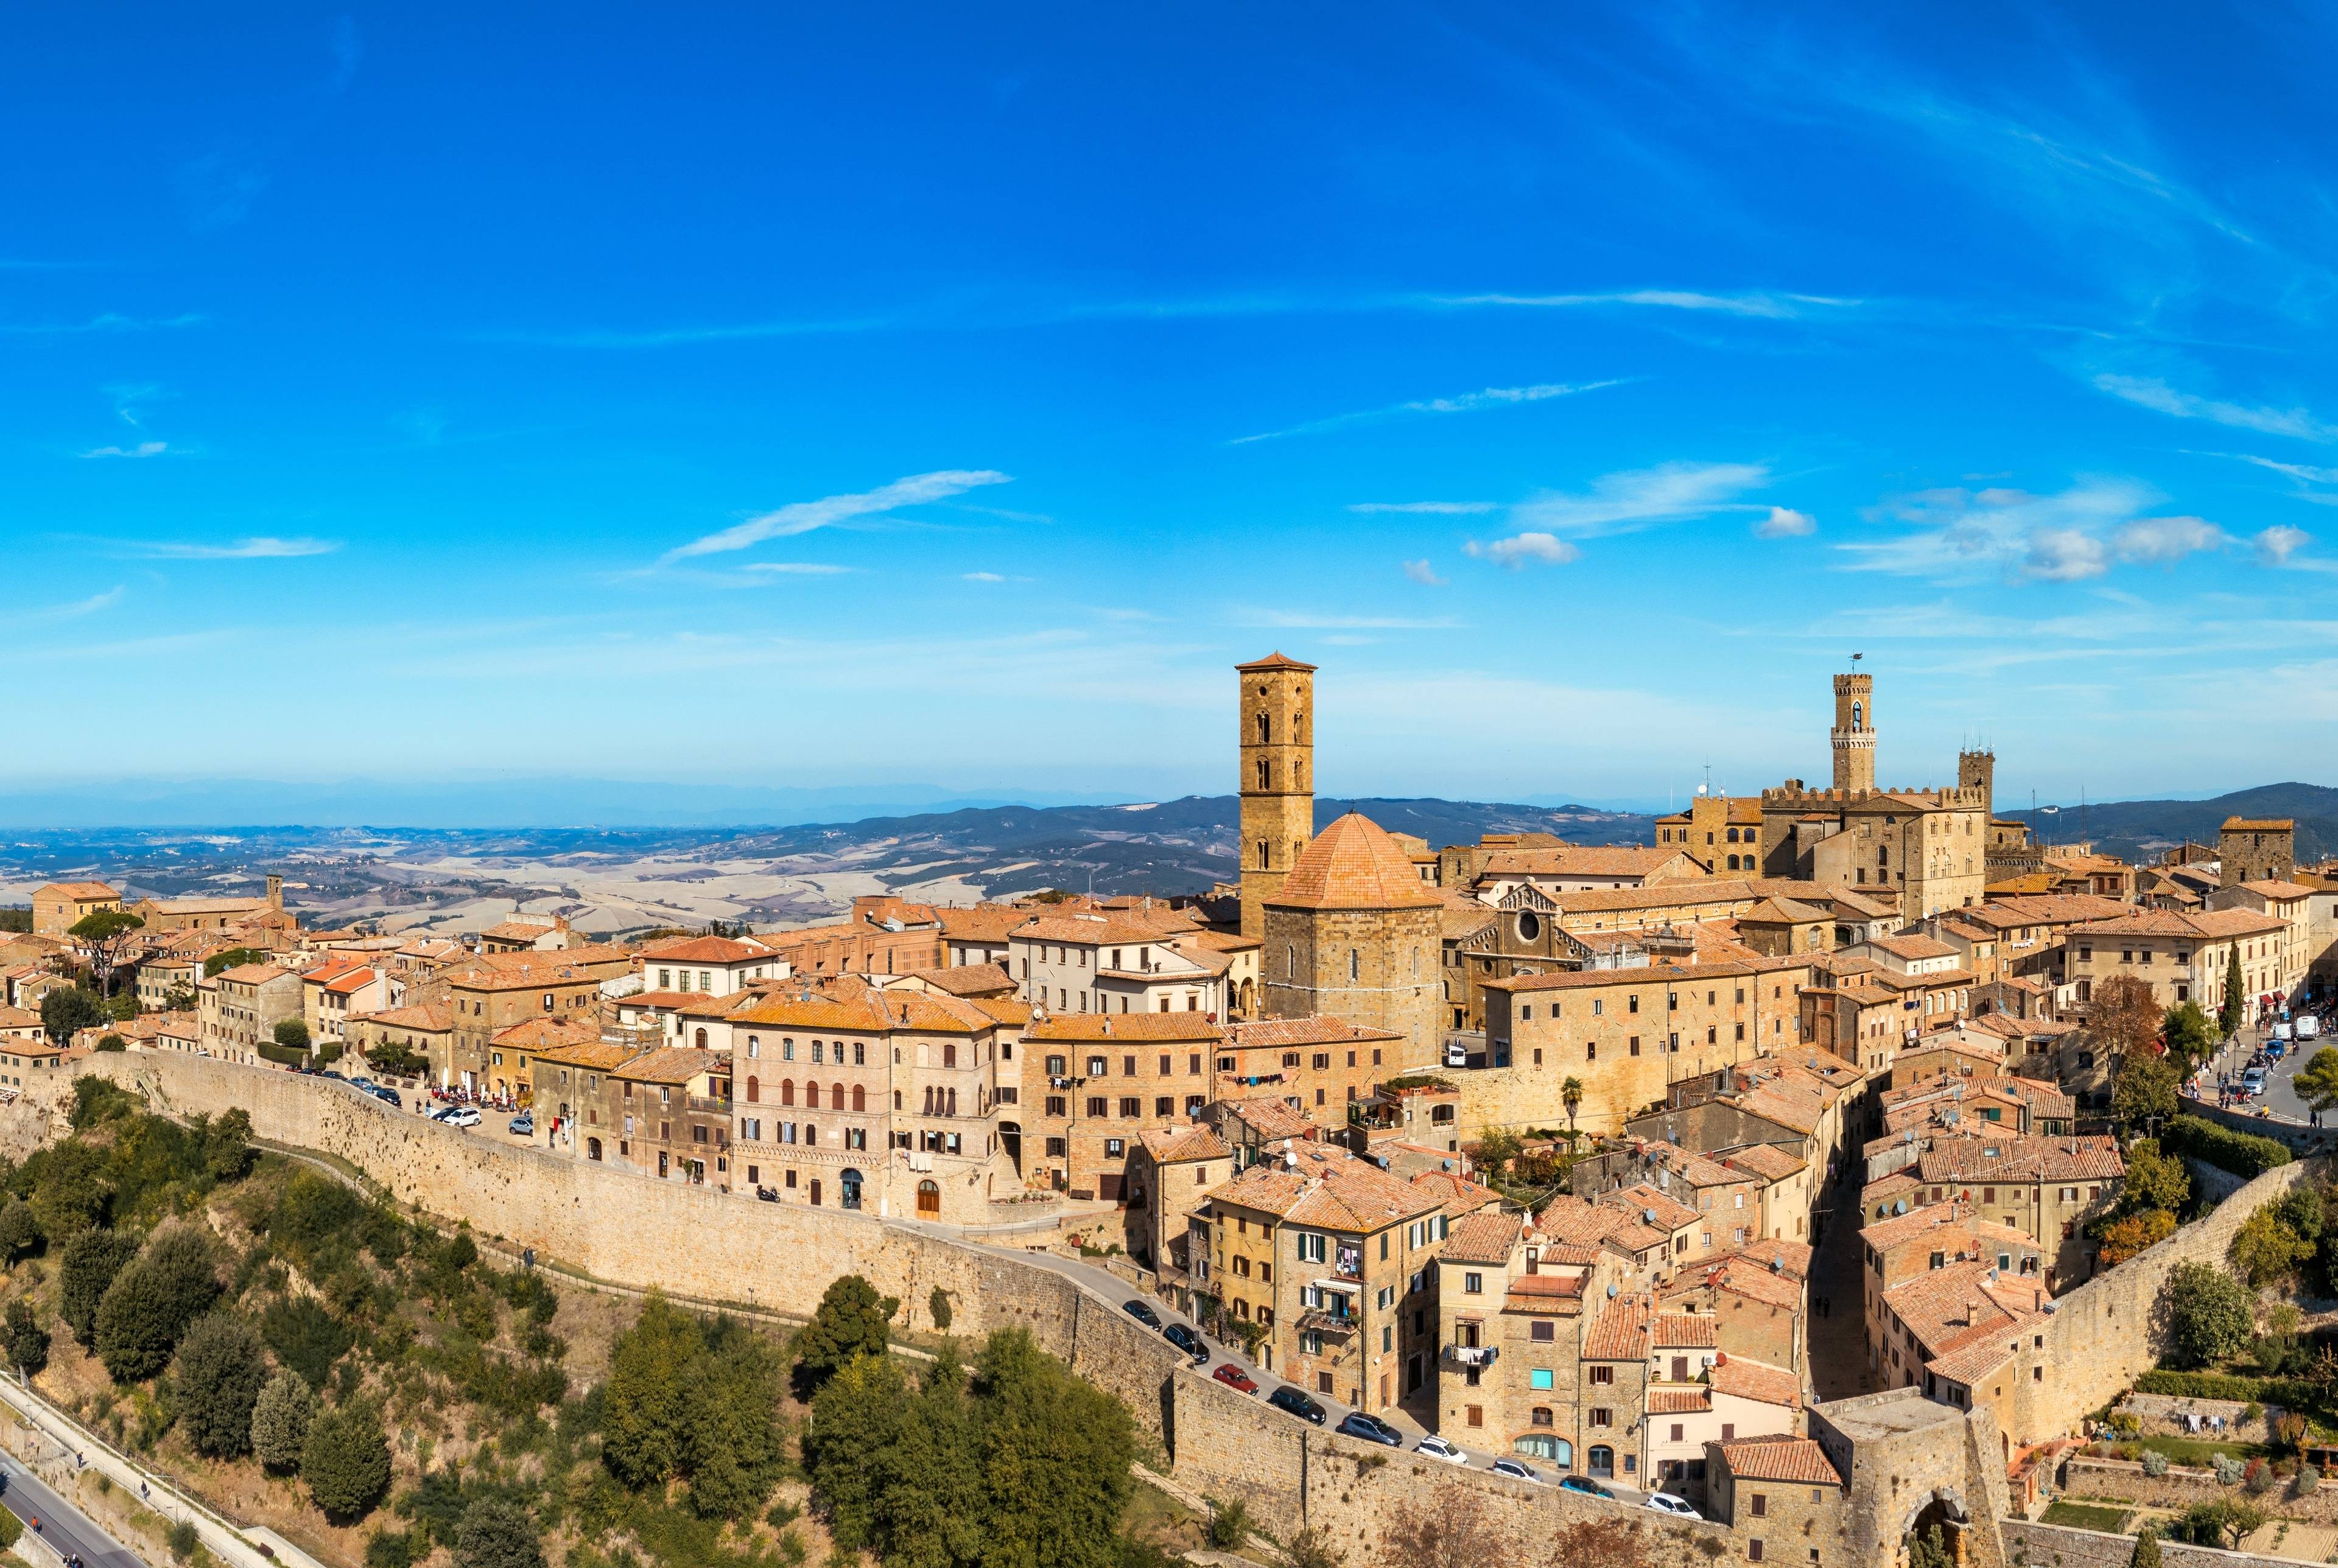 An Immersive Day Trip Through the Medieval Atmosphere of Tuscany